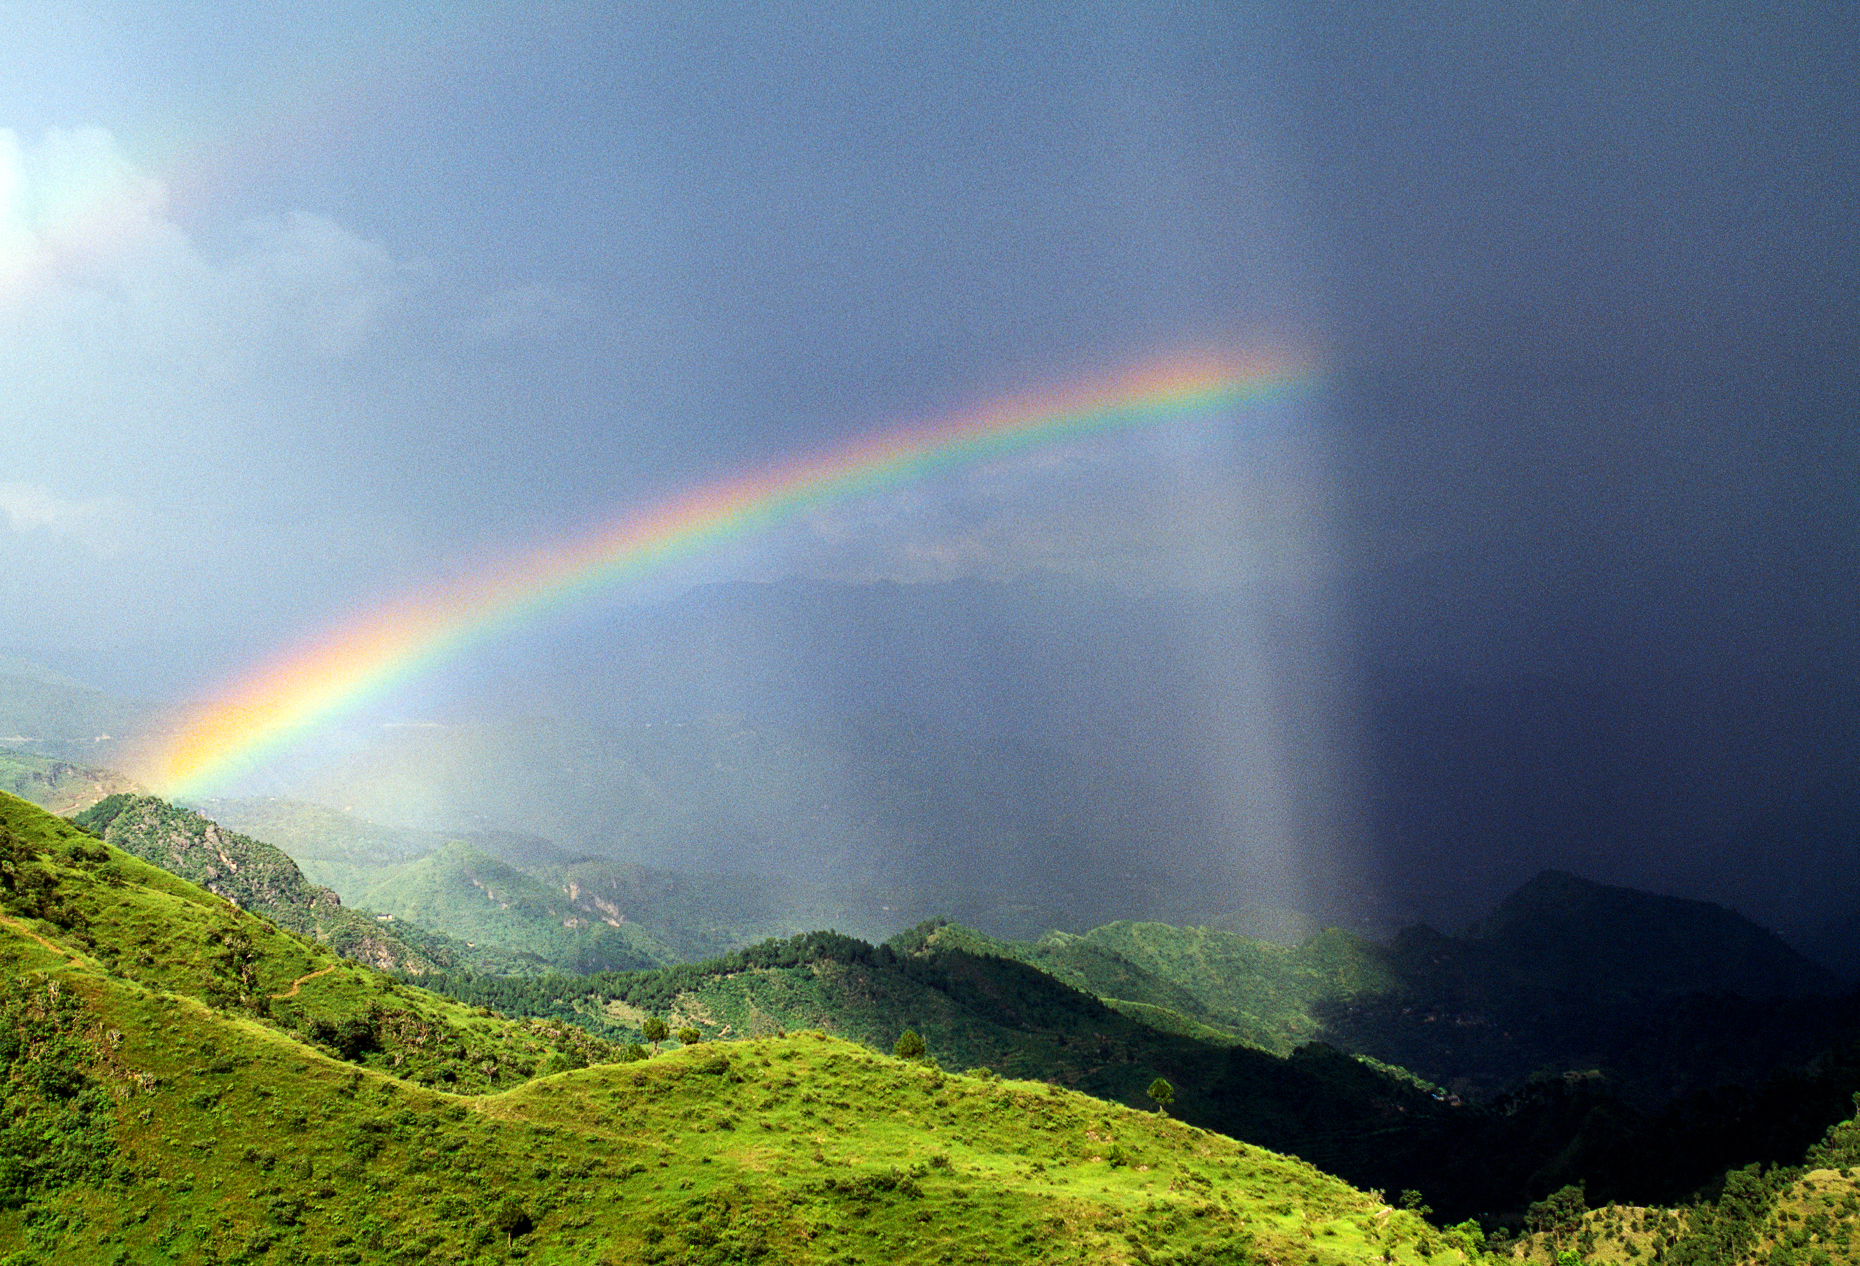 Rainbow over lush green hills in the "Lessor Himalayas", Darlagh